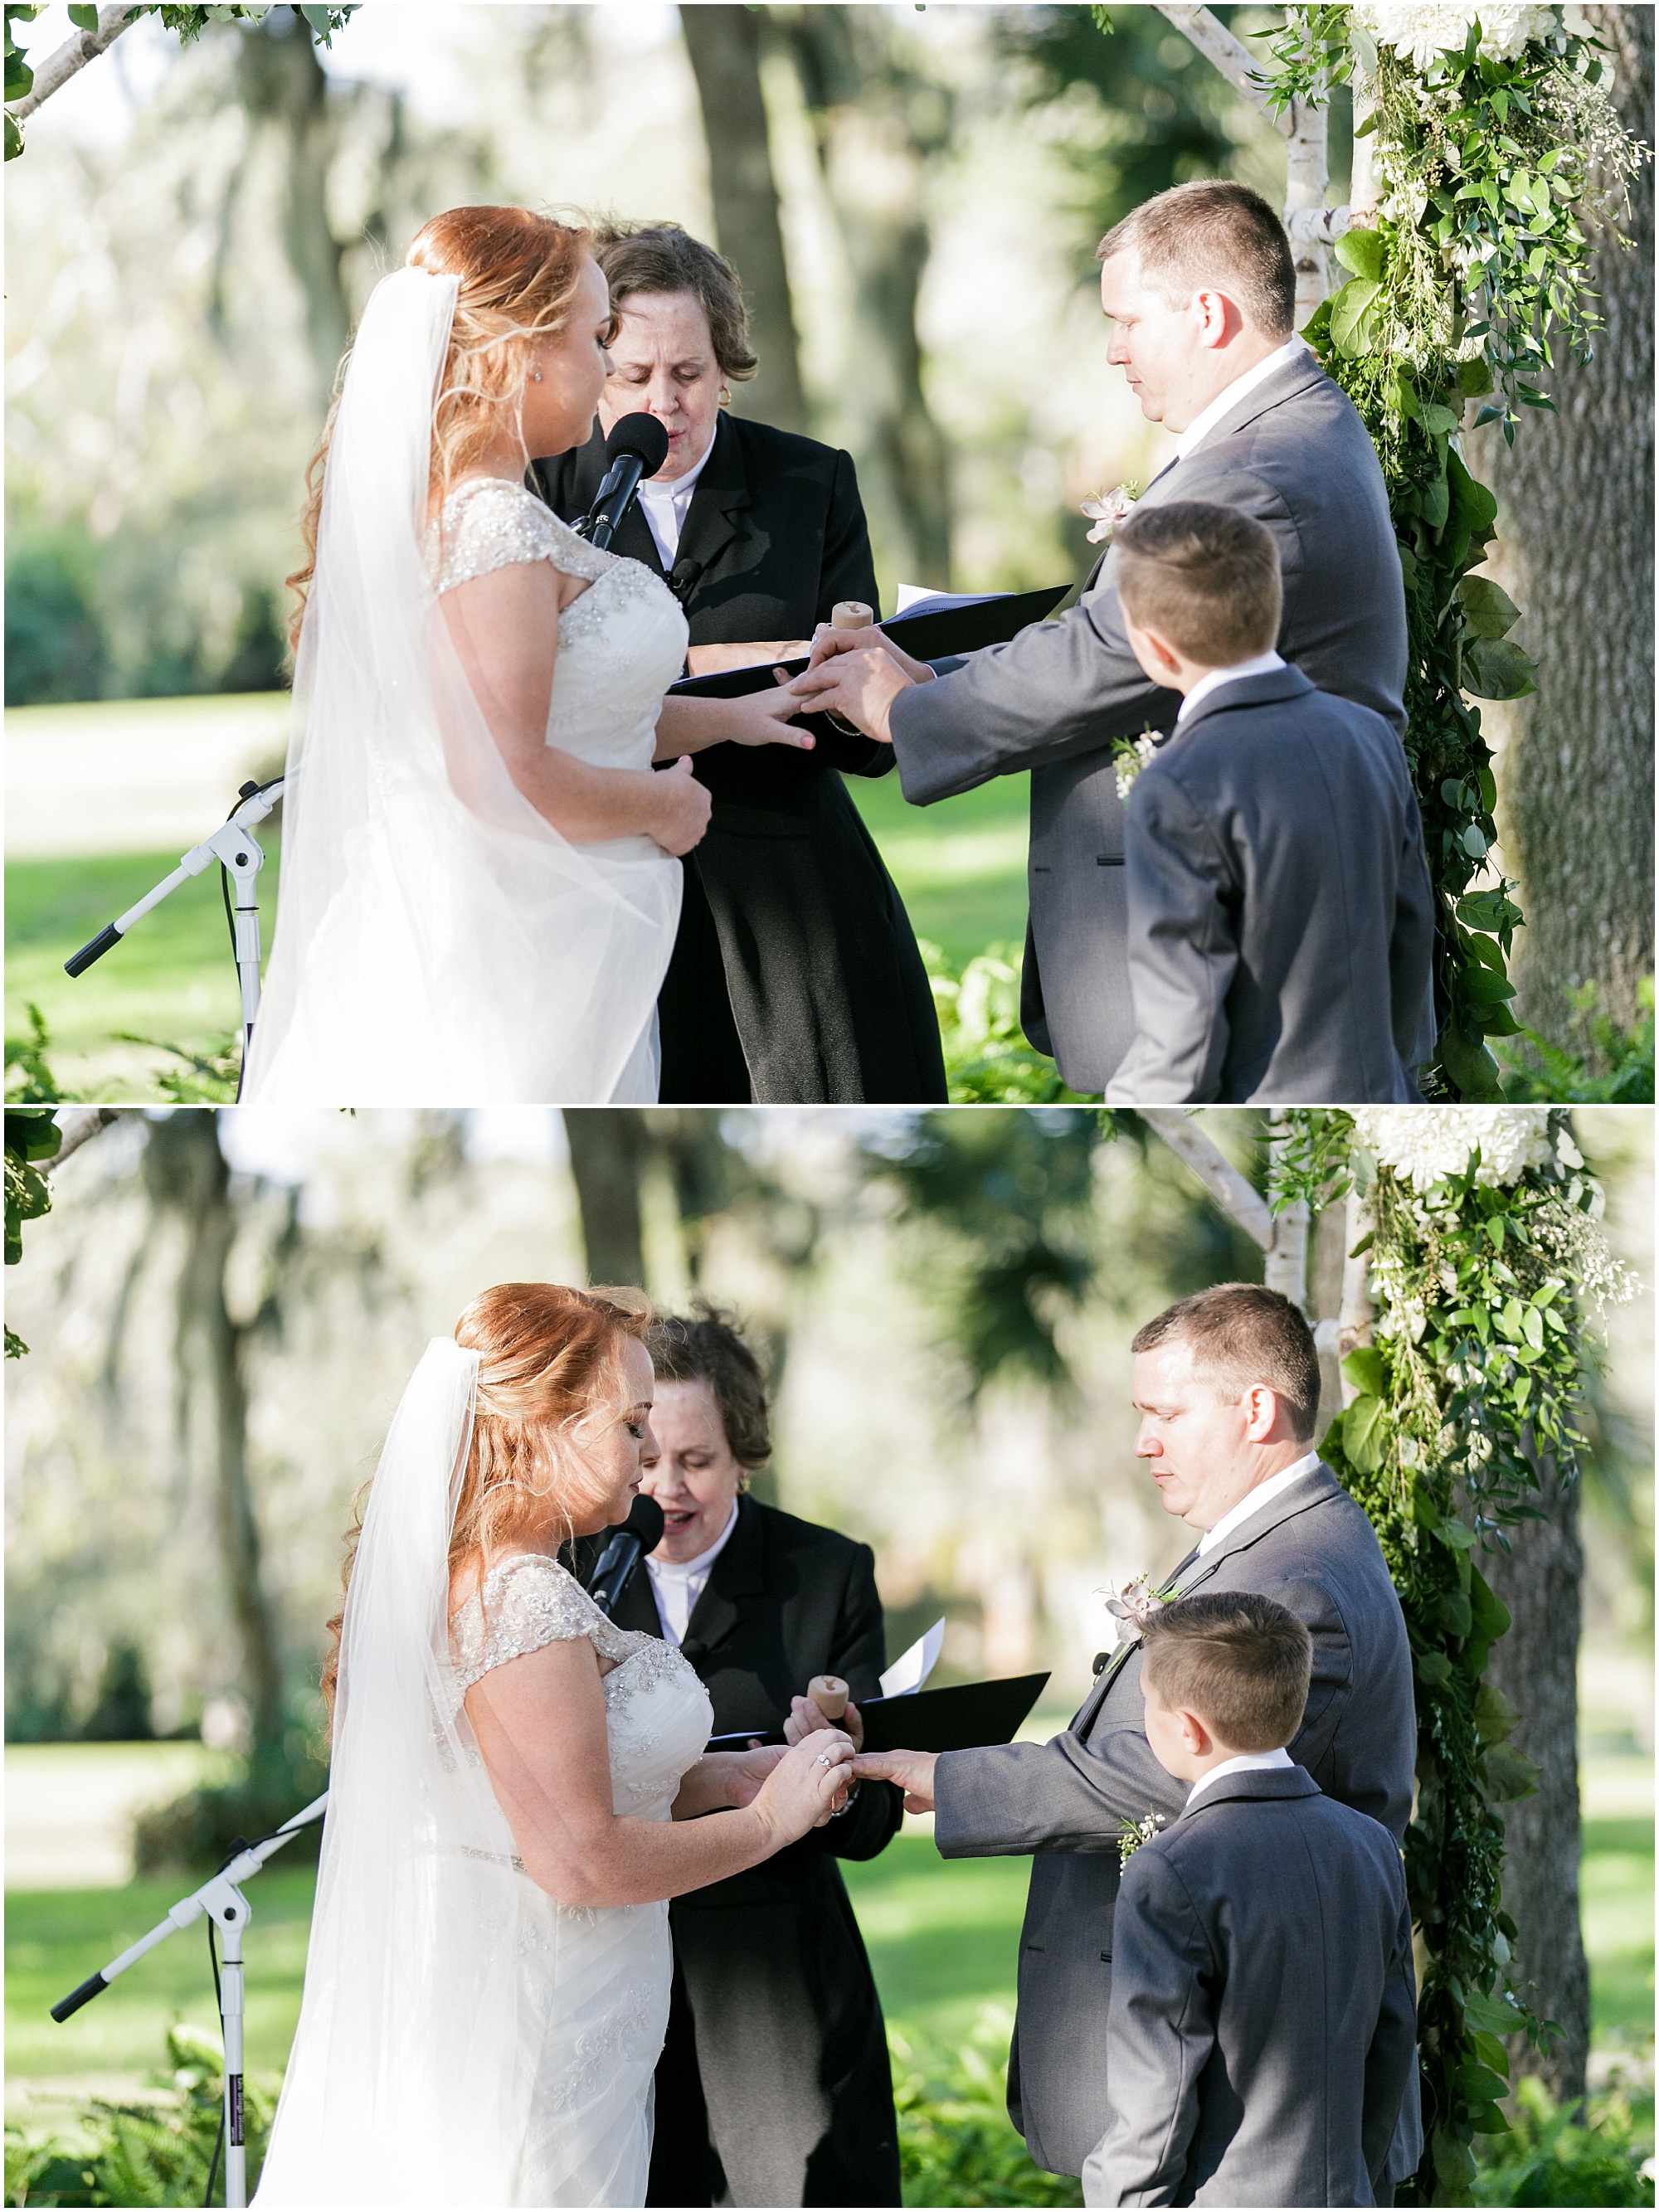 Bride and groom say their vows to each other at wedding. 